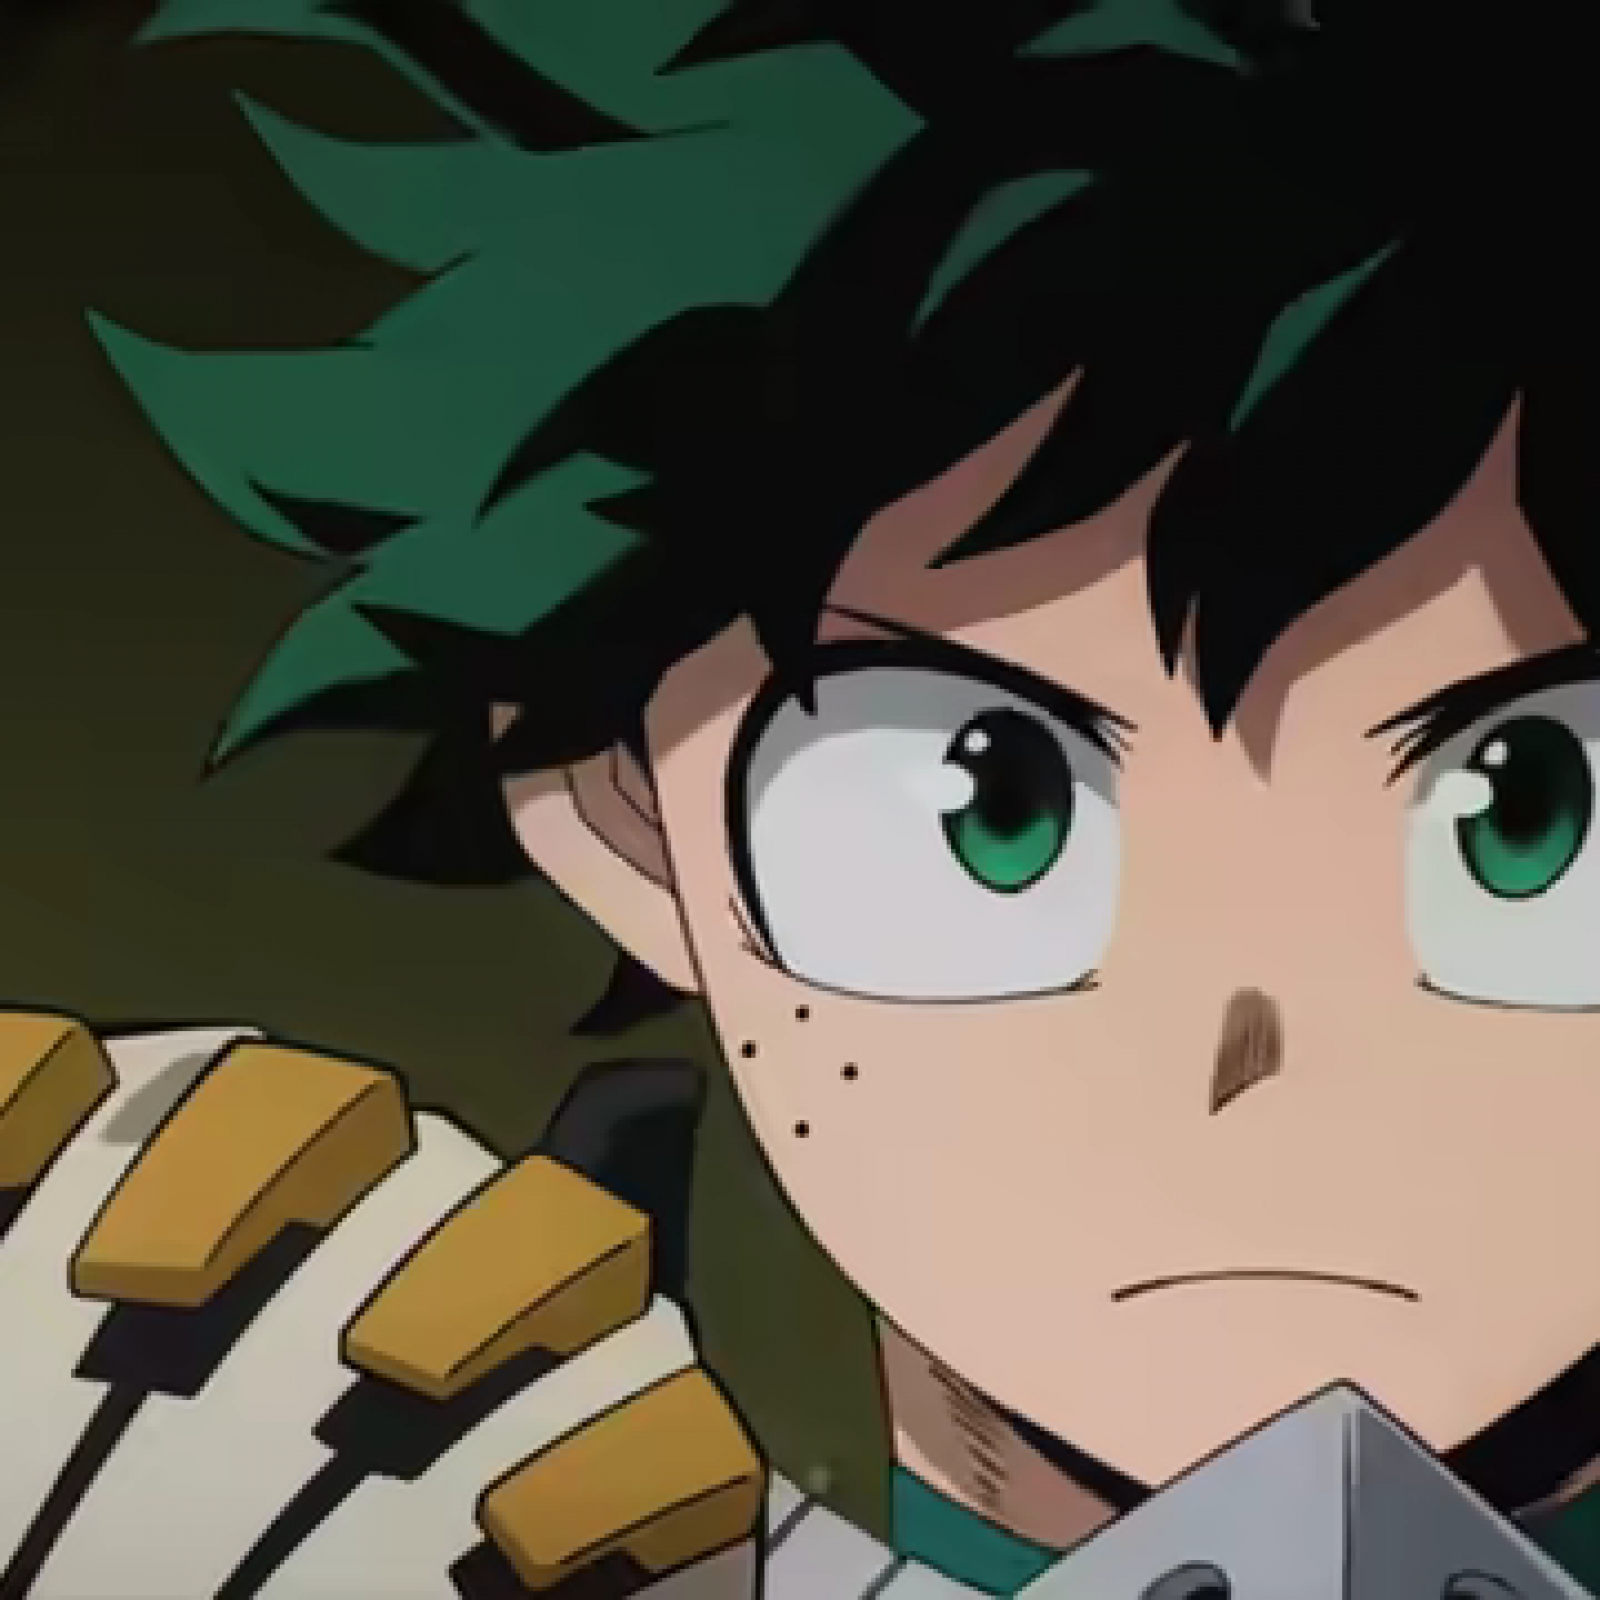 My Hero Academia' Movie 3 Trailer, Release Date and Synopsis Revealed